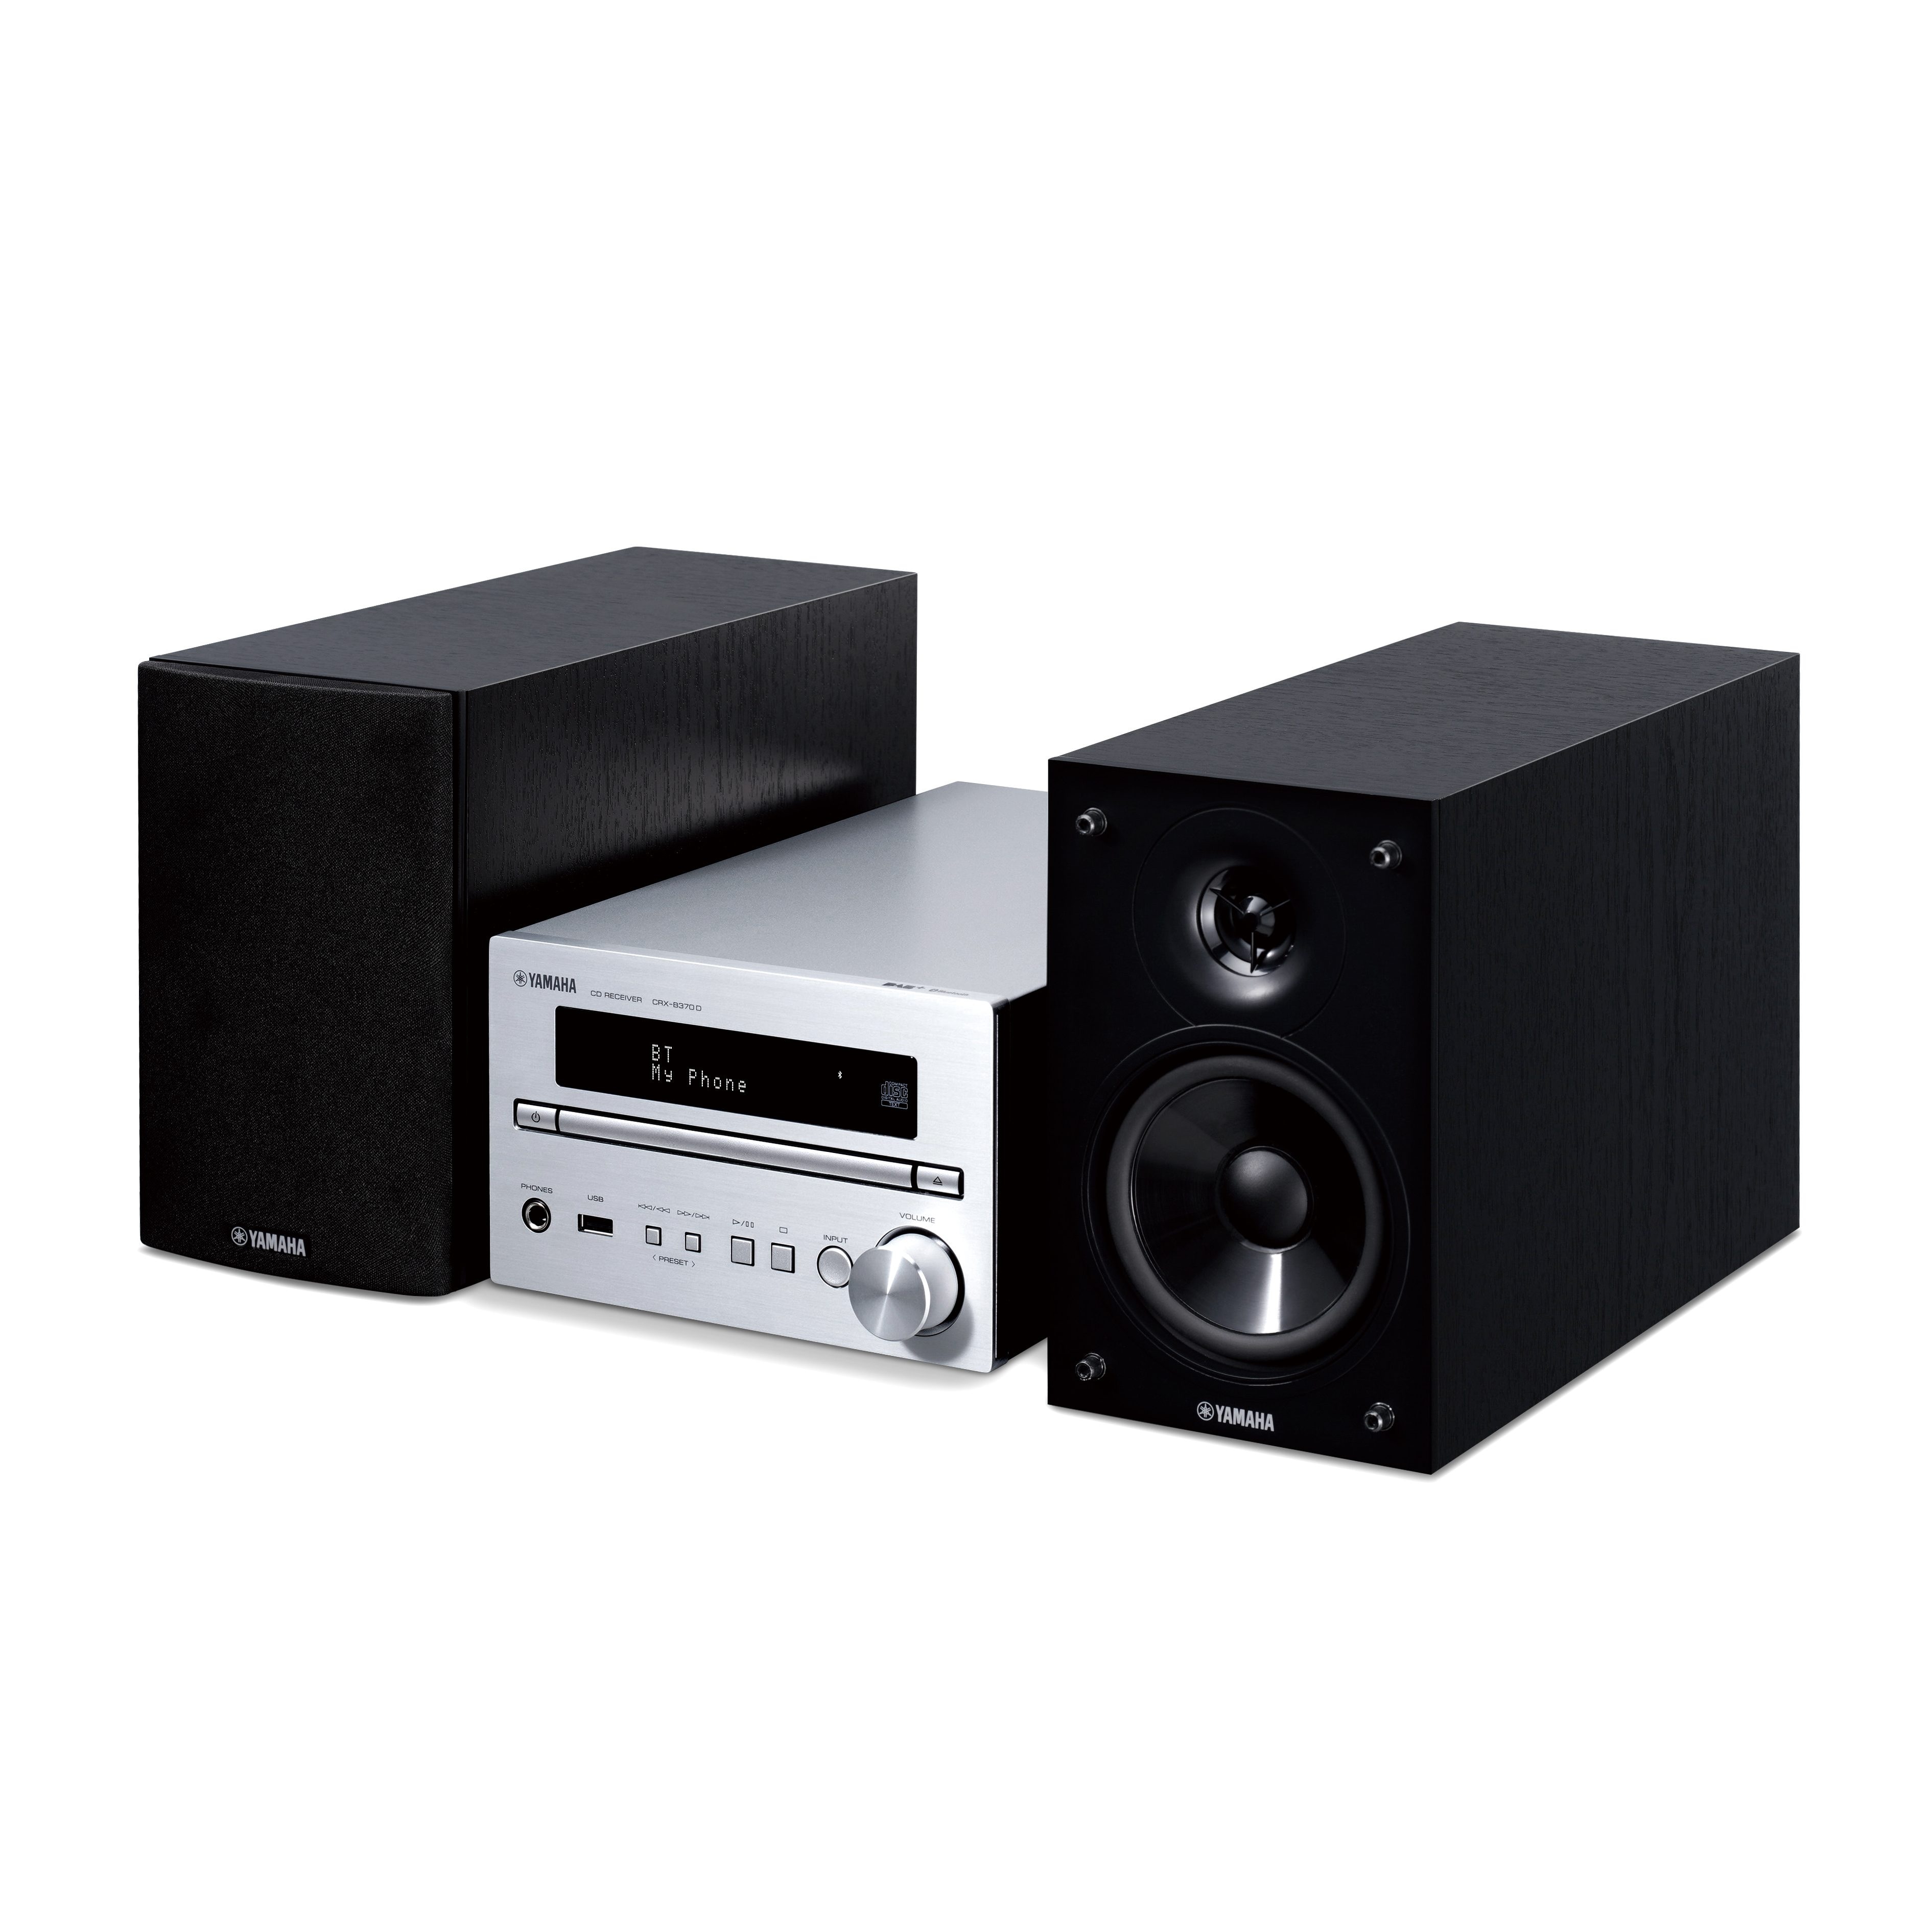 MCR-B270D - - Products - Overview & Countries Audio Visual - Systems - Yamaha Other - European HiFi